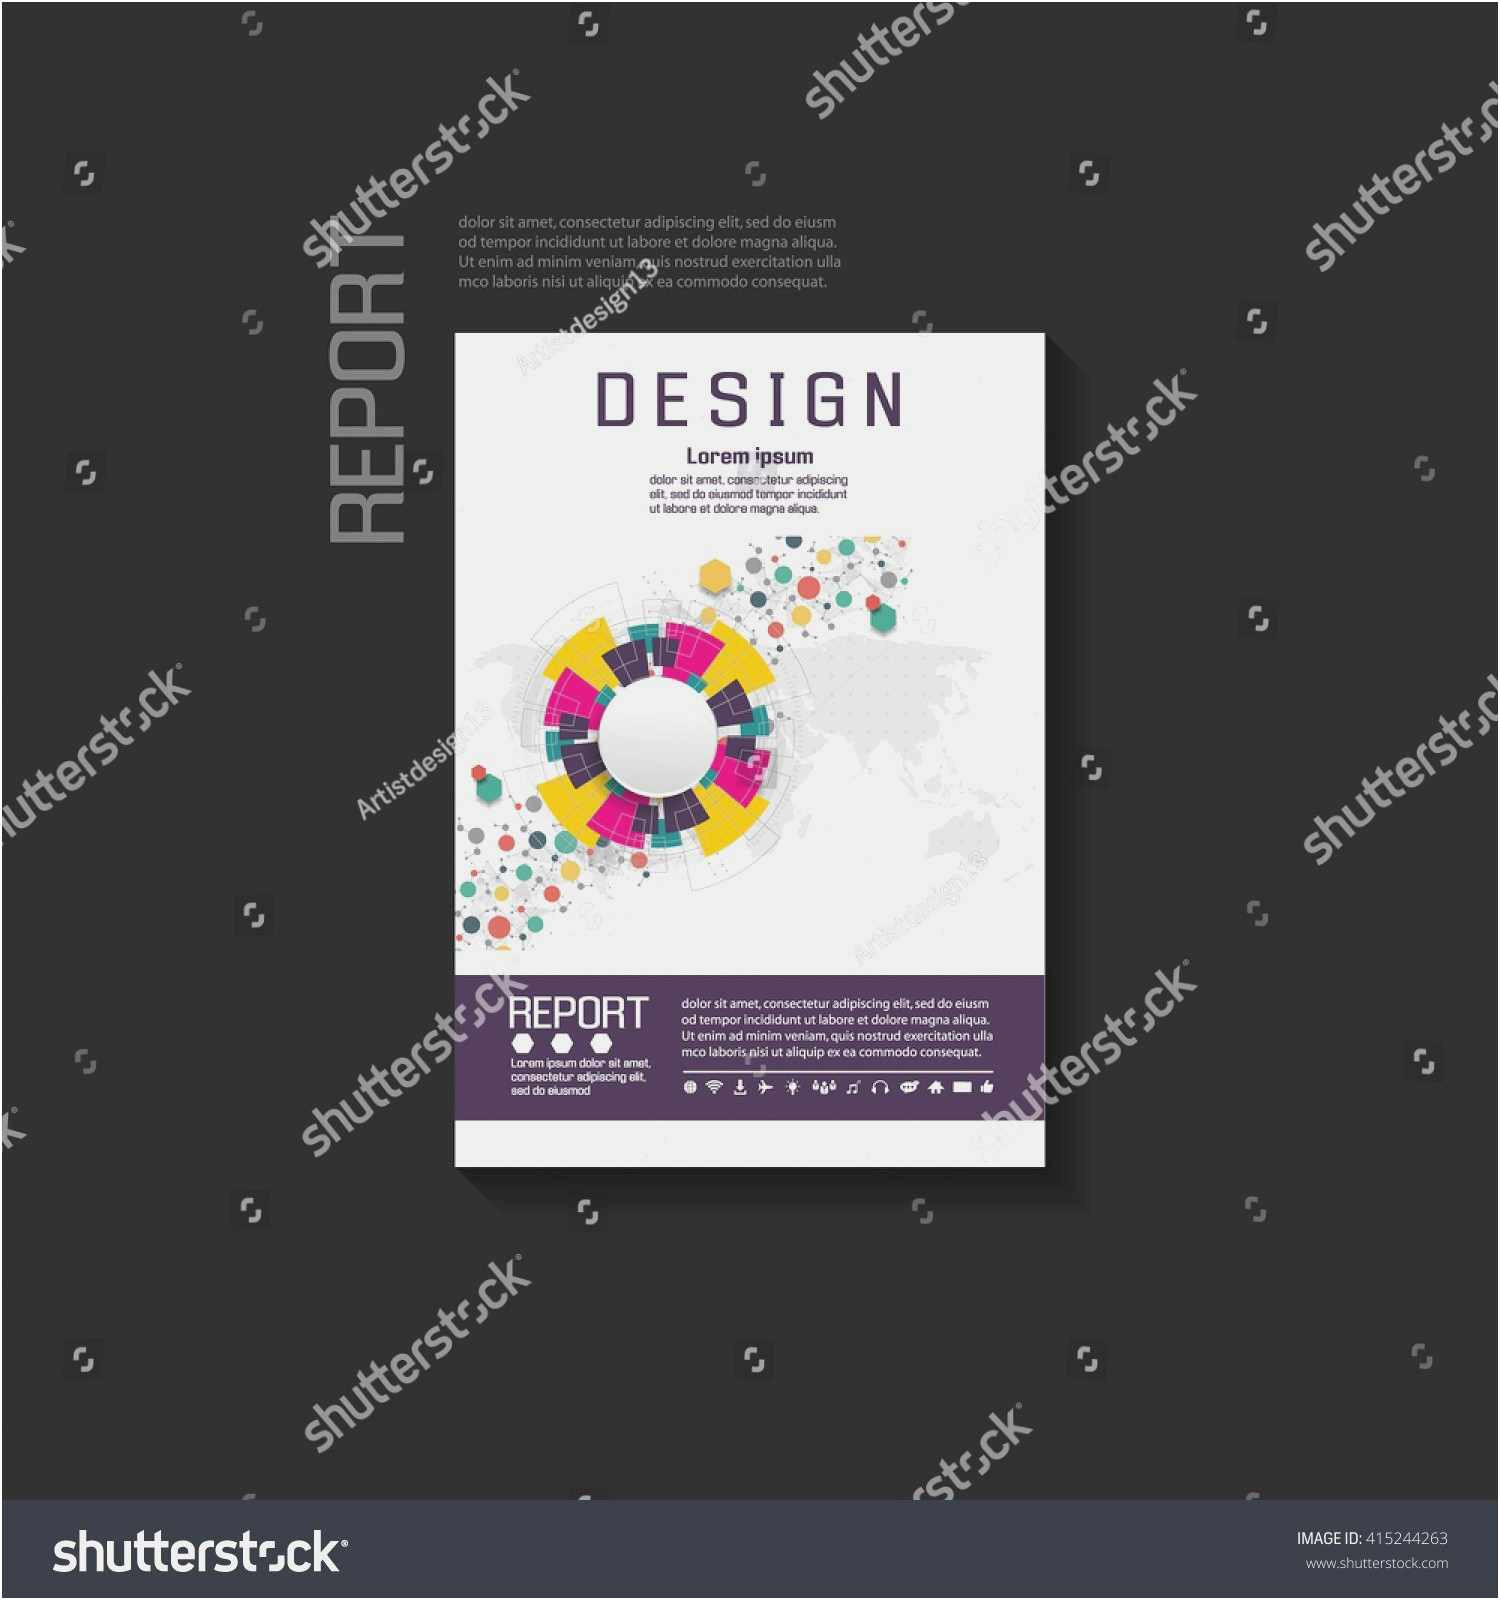 microsoft word card template elegant free word 2010 brochure template new poster templates 0d wallpapers of microsoft word card template